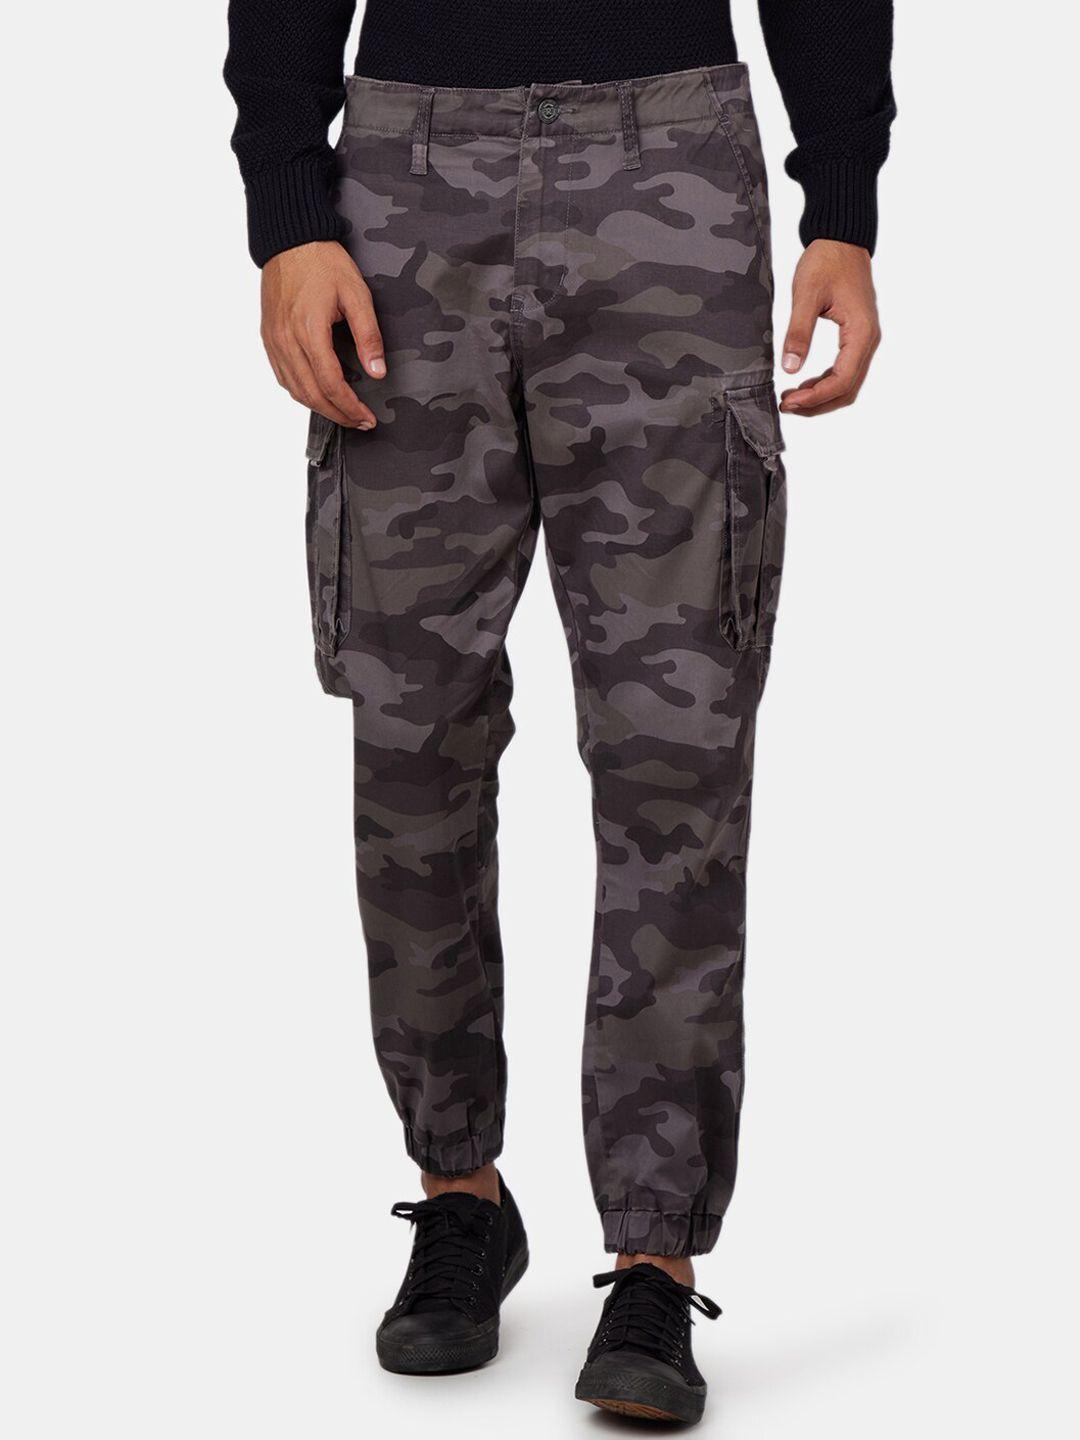 royal enfield men grey camouflage printed cargos trousers